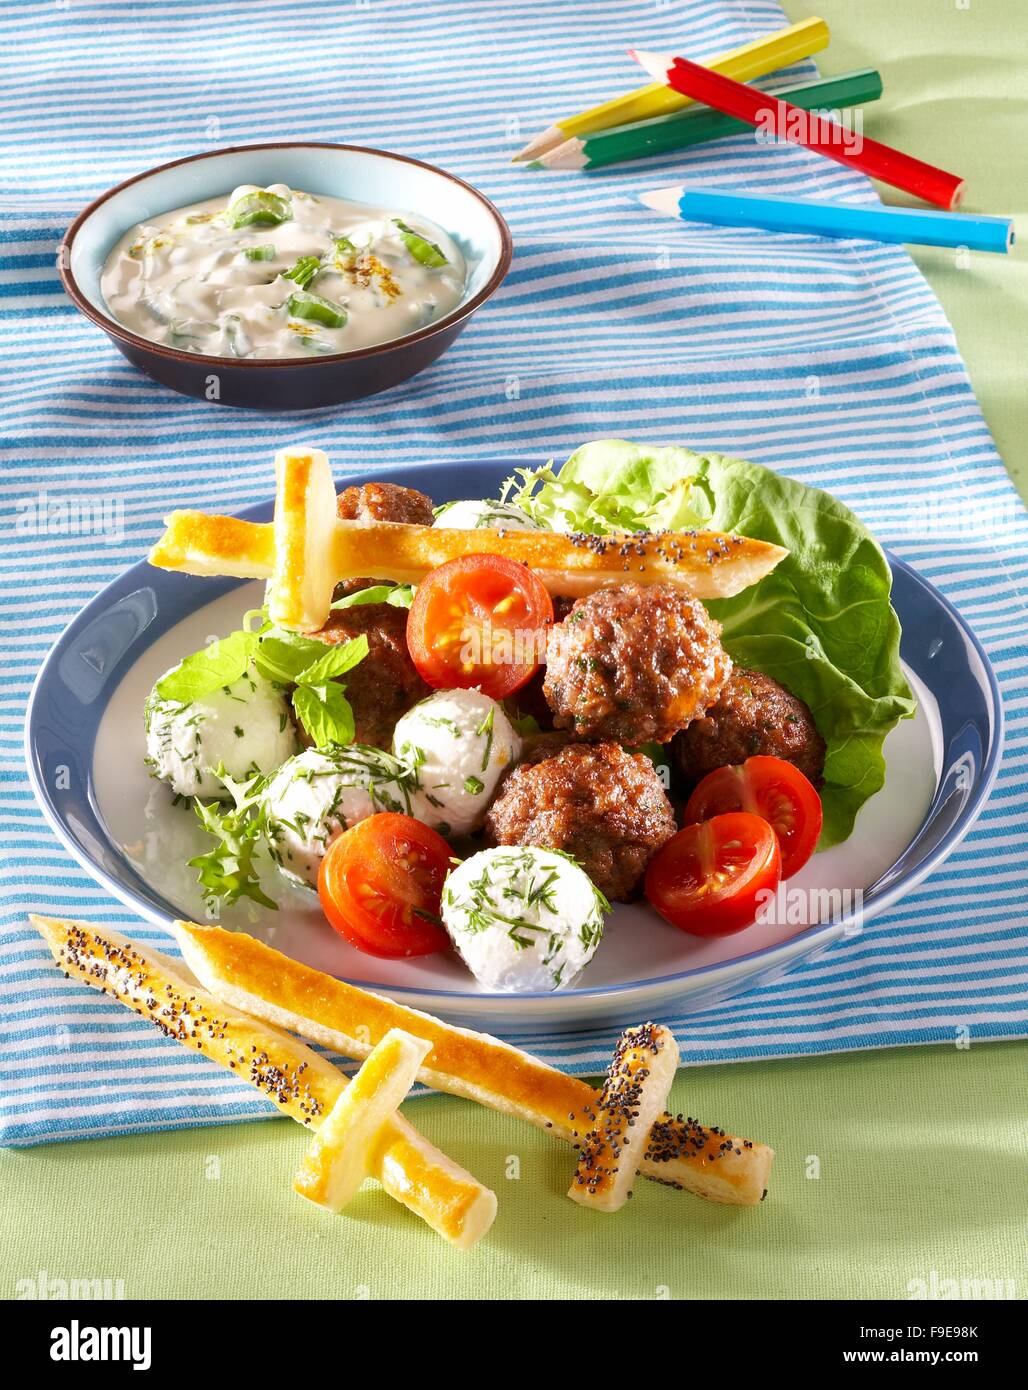 Swords for Superheroes and Cheese and Meat Balls Stock Photo